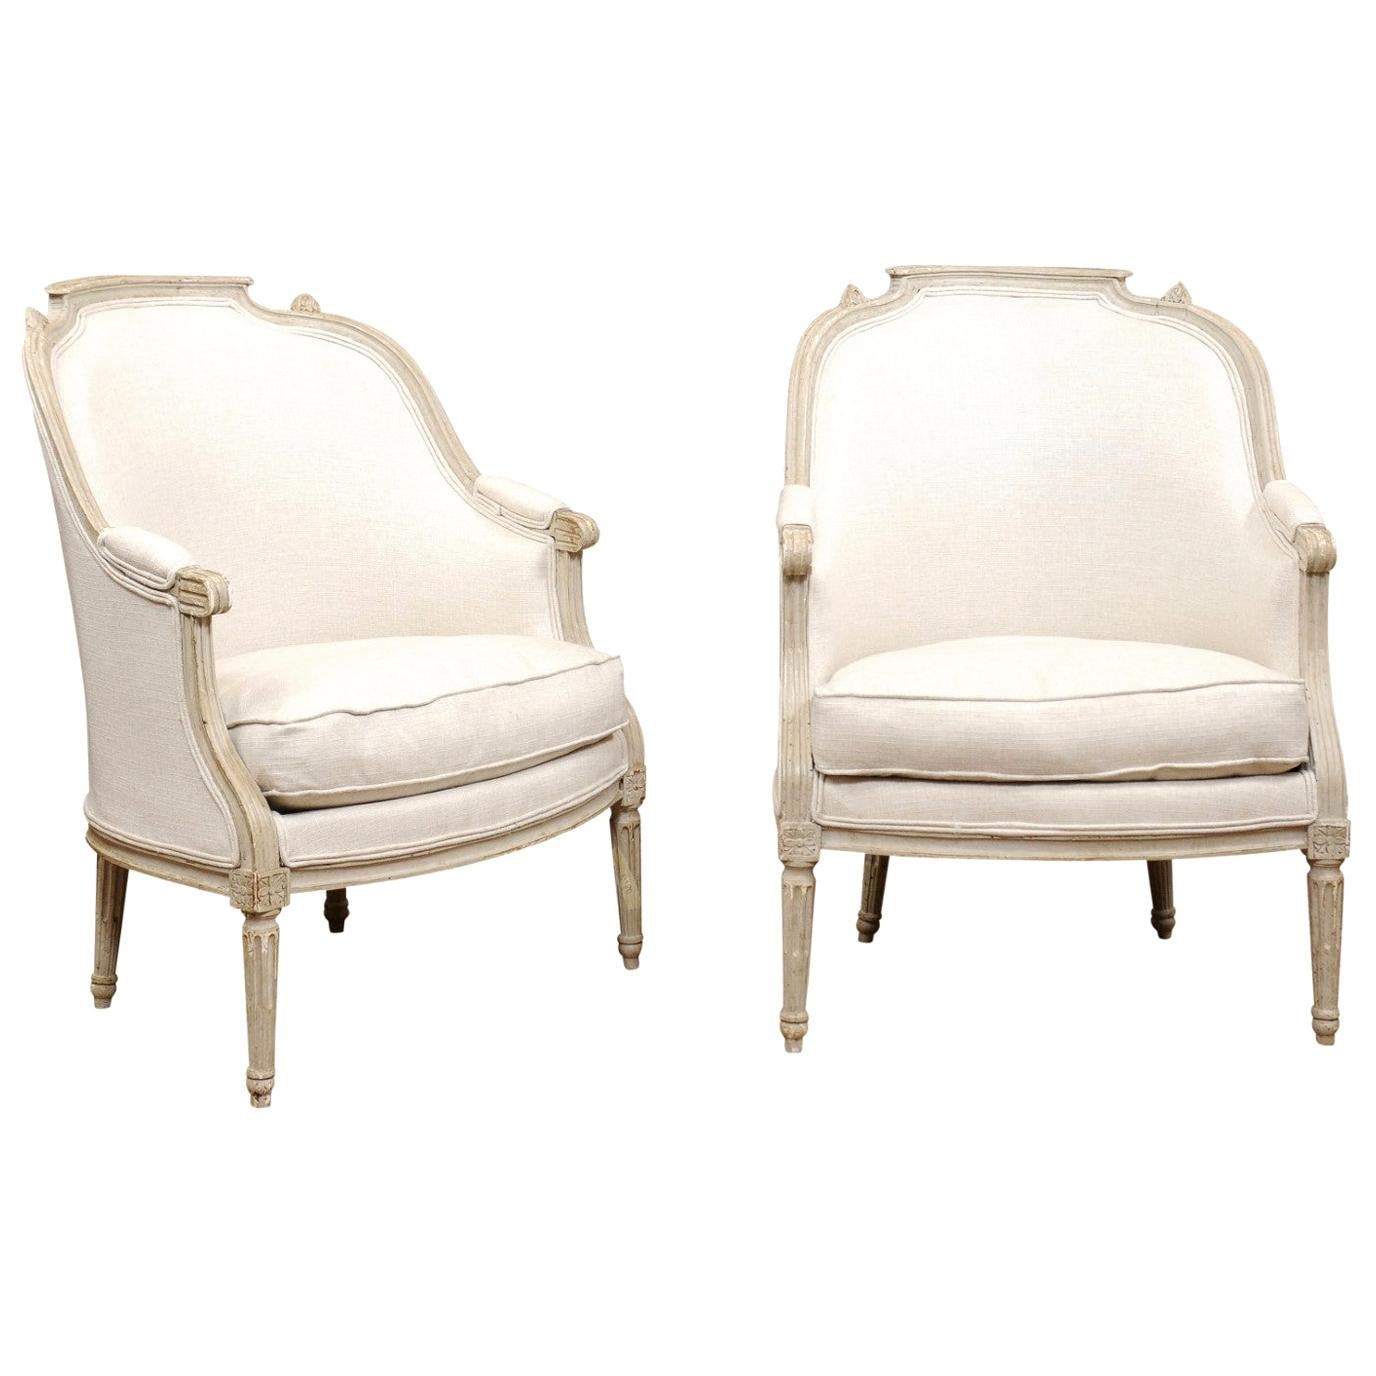 Pair of  French Painted Louis XVI Bergers, Late 18th Century